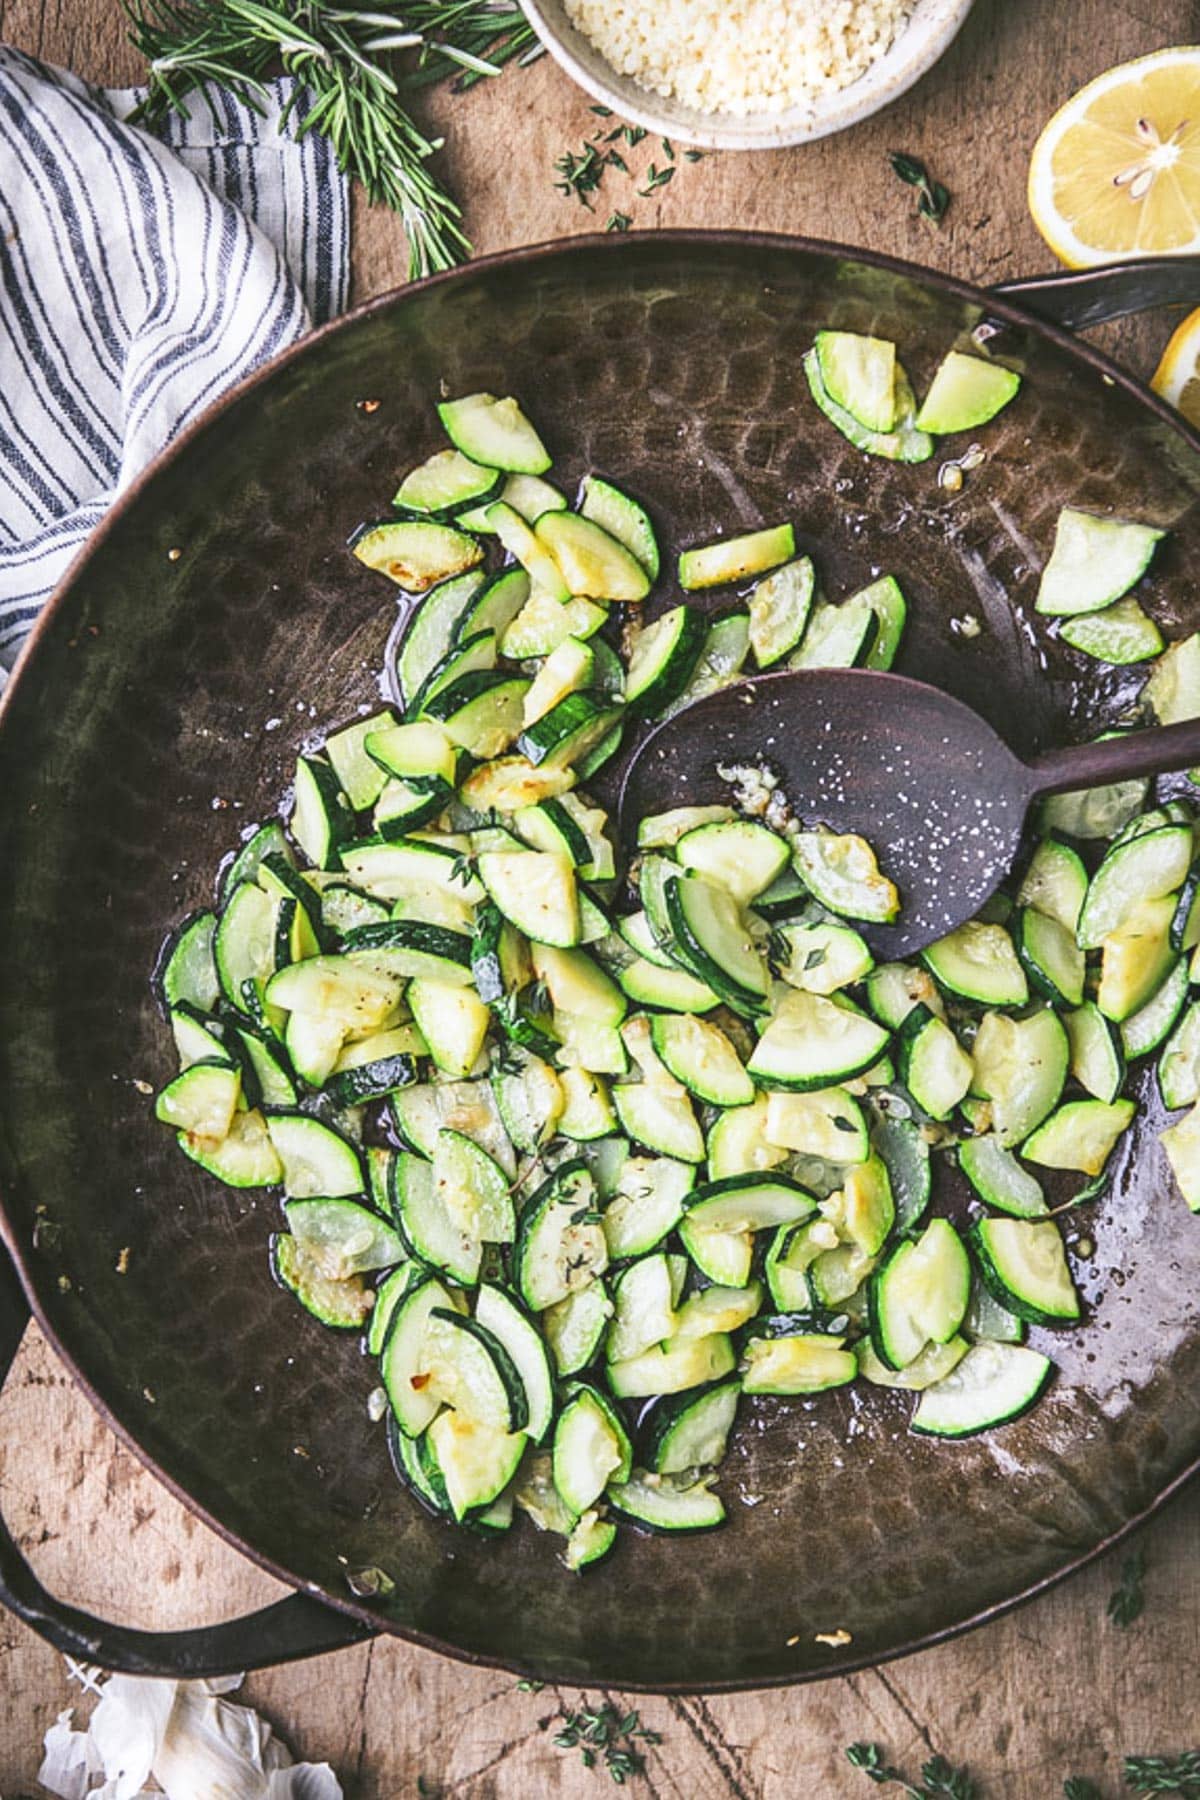 Sauteed zucchini in a cast iron skillet with a wooden spoon.